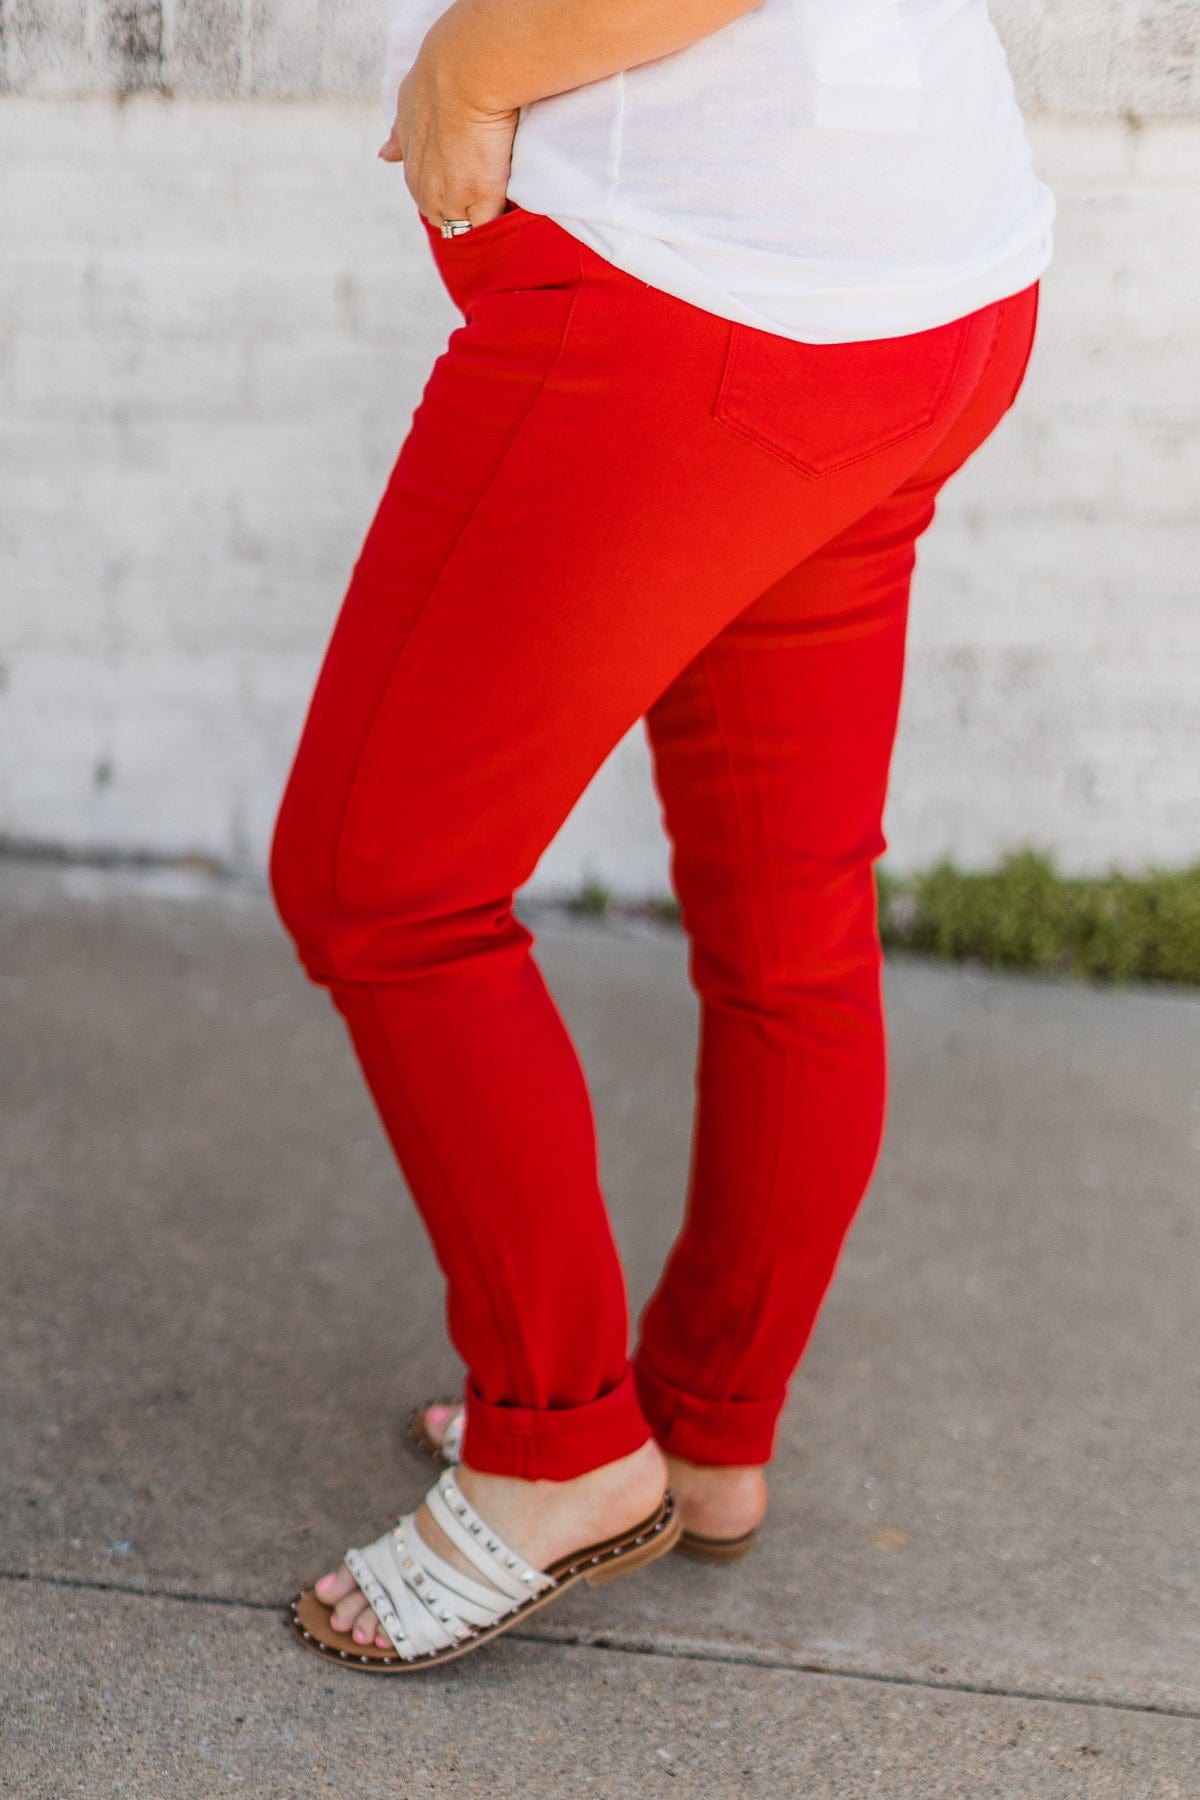 KanCan Colored Skinny Jeans- Scarlet Red – The Pulse Boutique